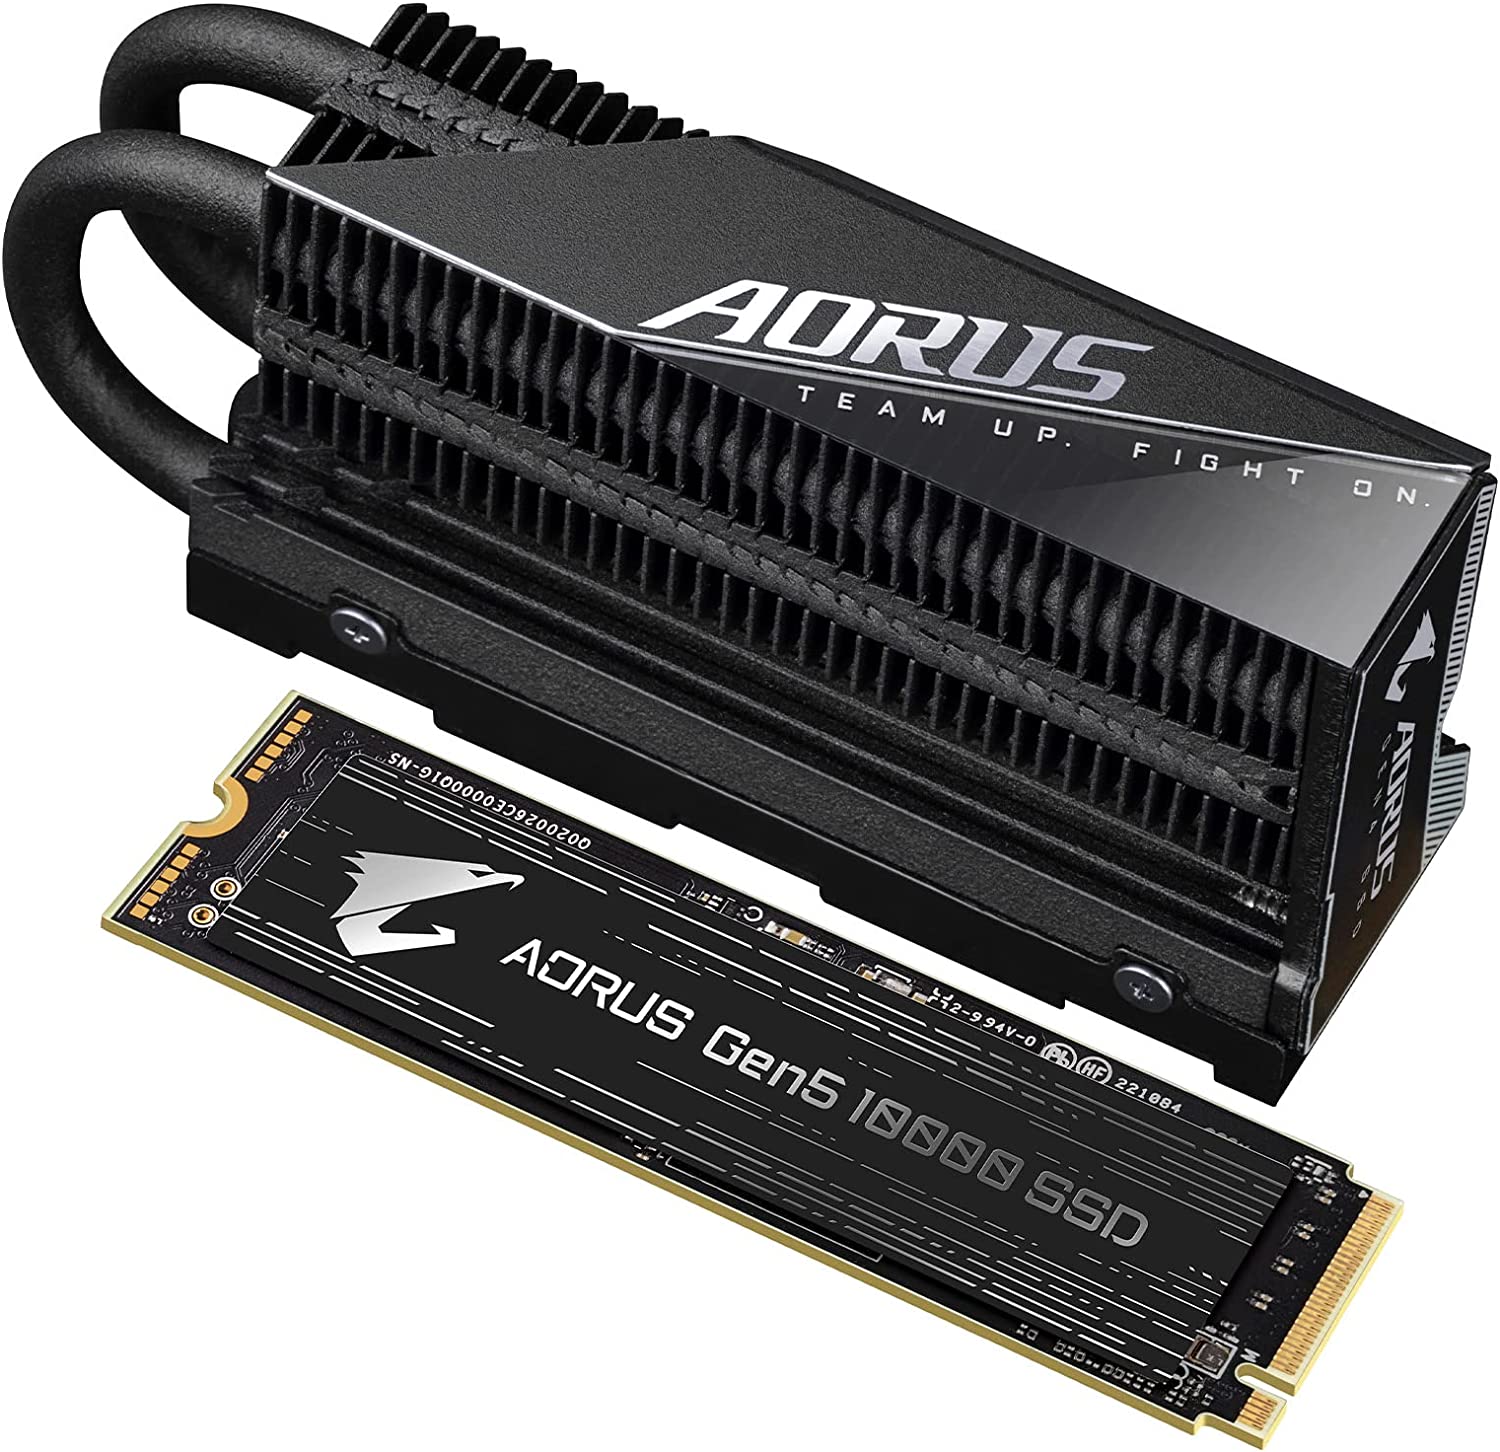 The Gigabyte Aorus Gen5 10000 doesn't have a fan, but it <em>does</em> have a giant heatsink that might not fit in all PC builds.